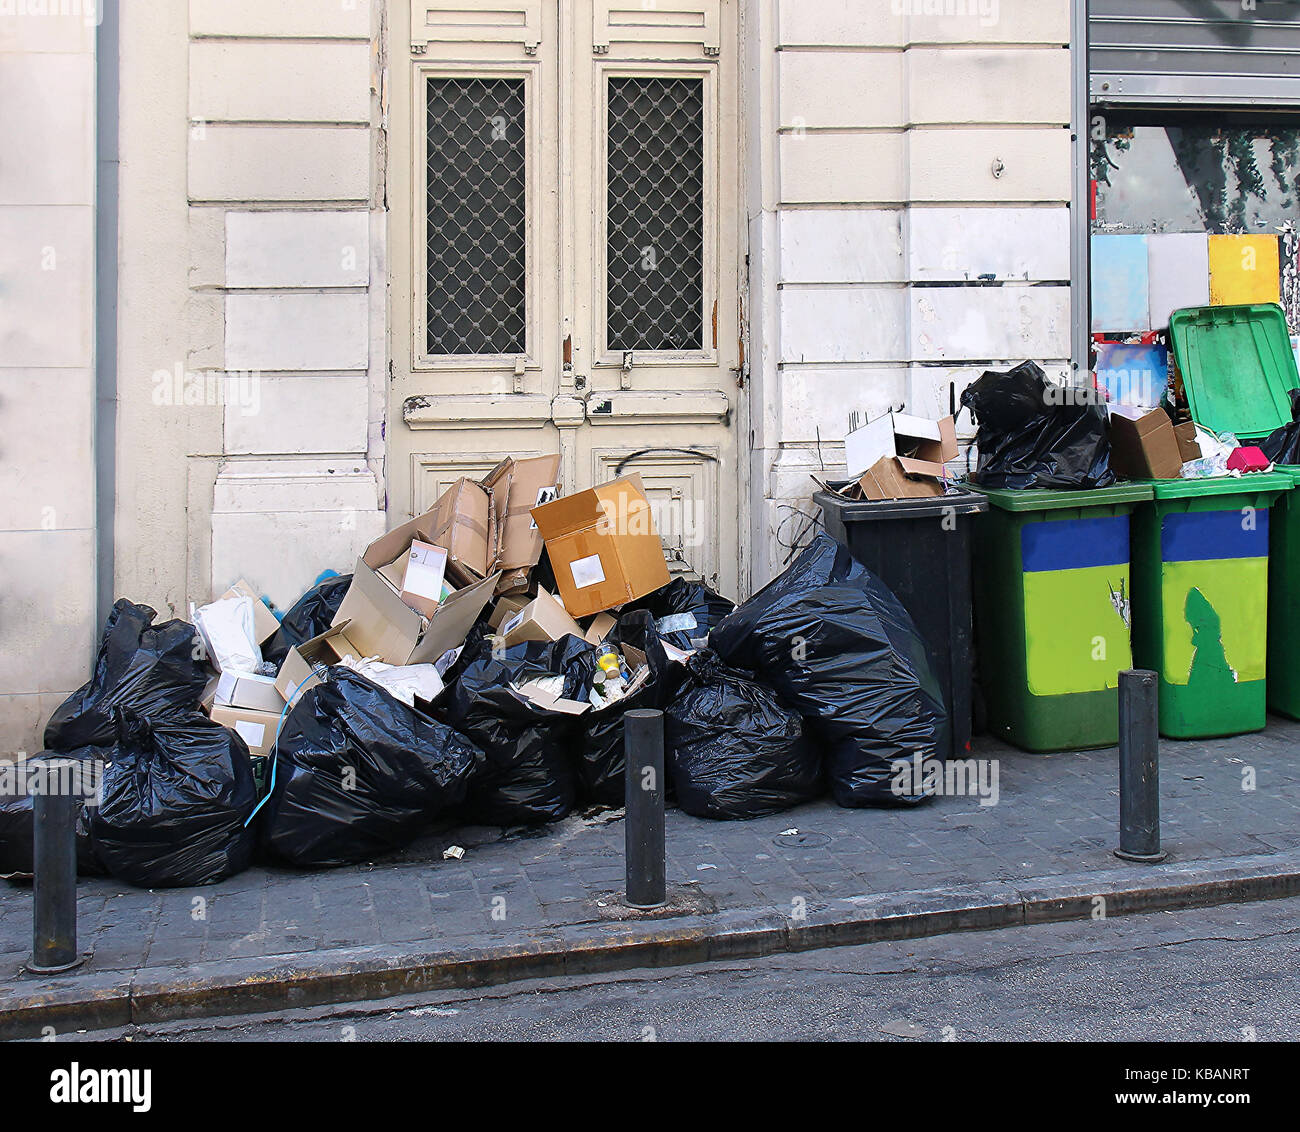 Large garbage pile inside black bags and green containers on street Stock Photo